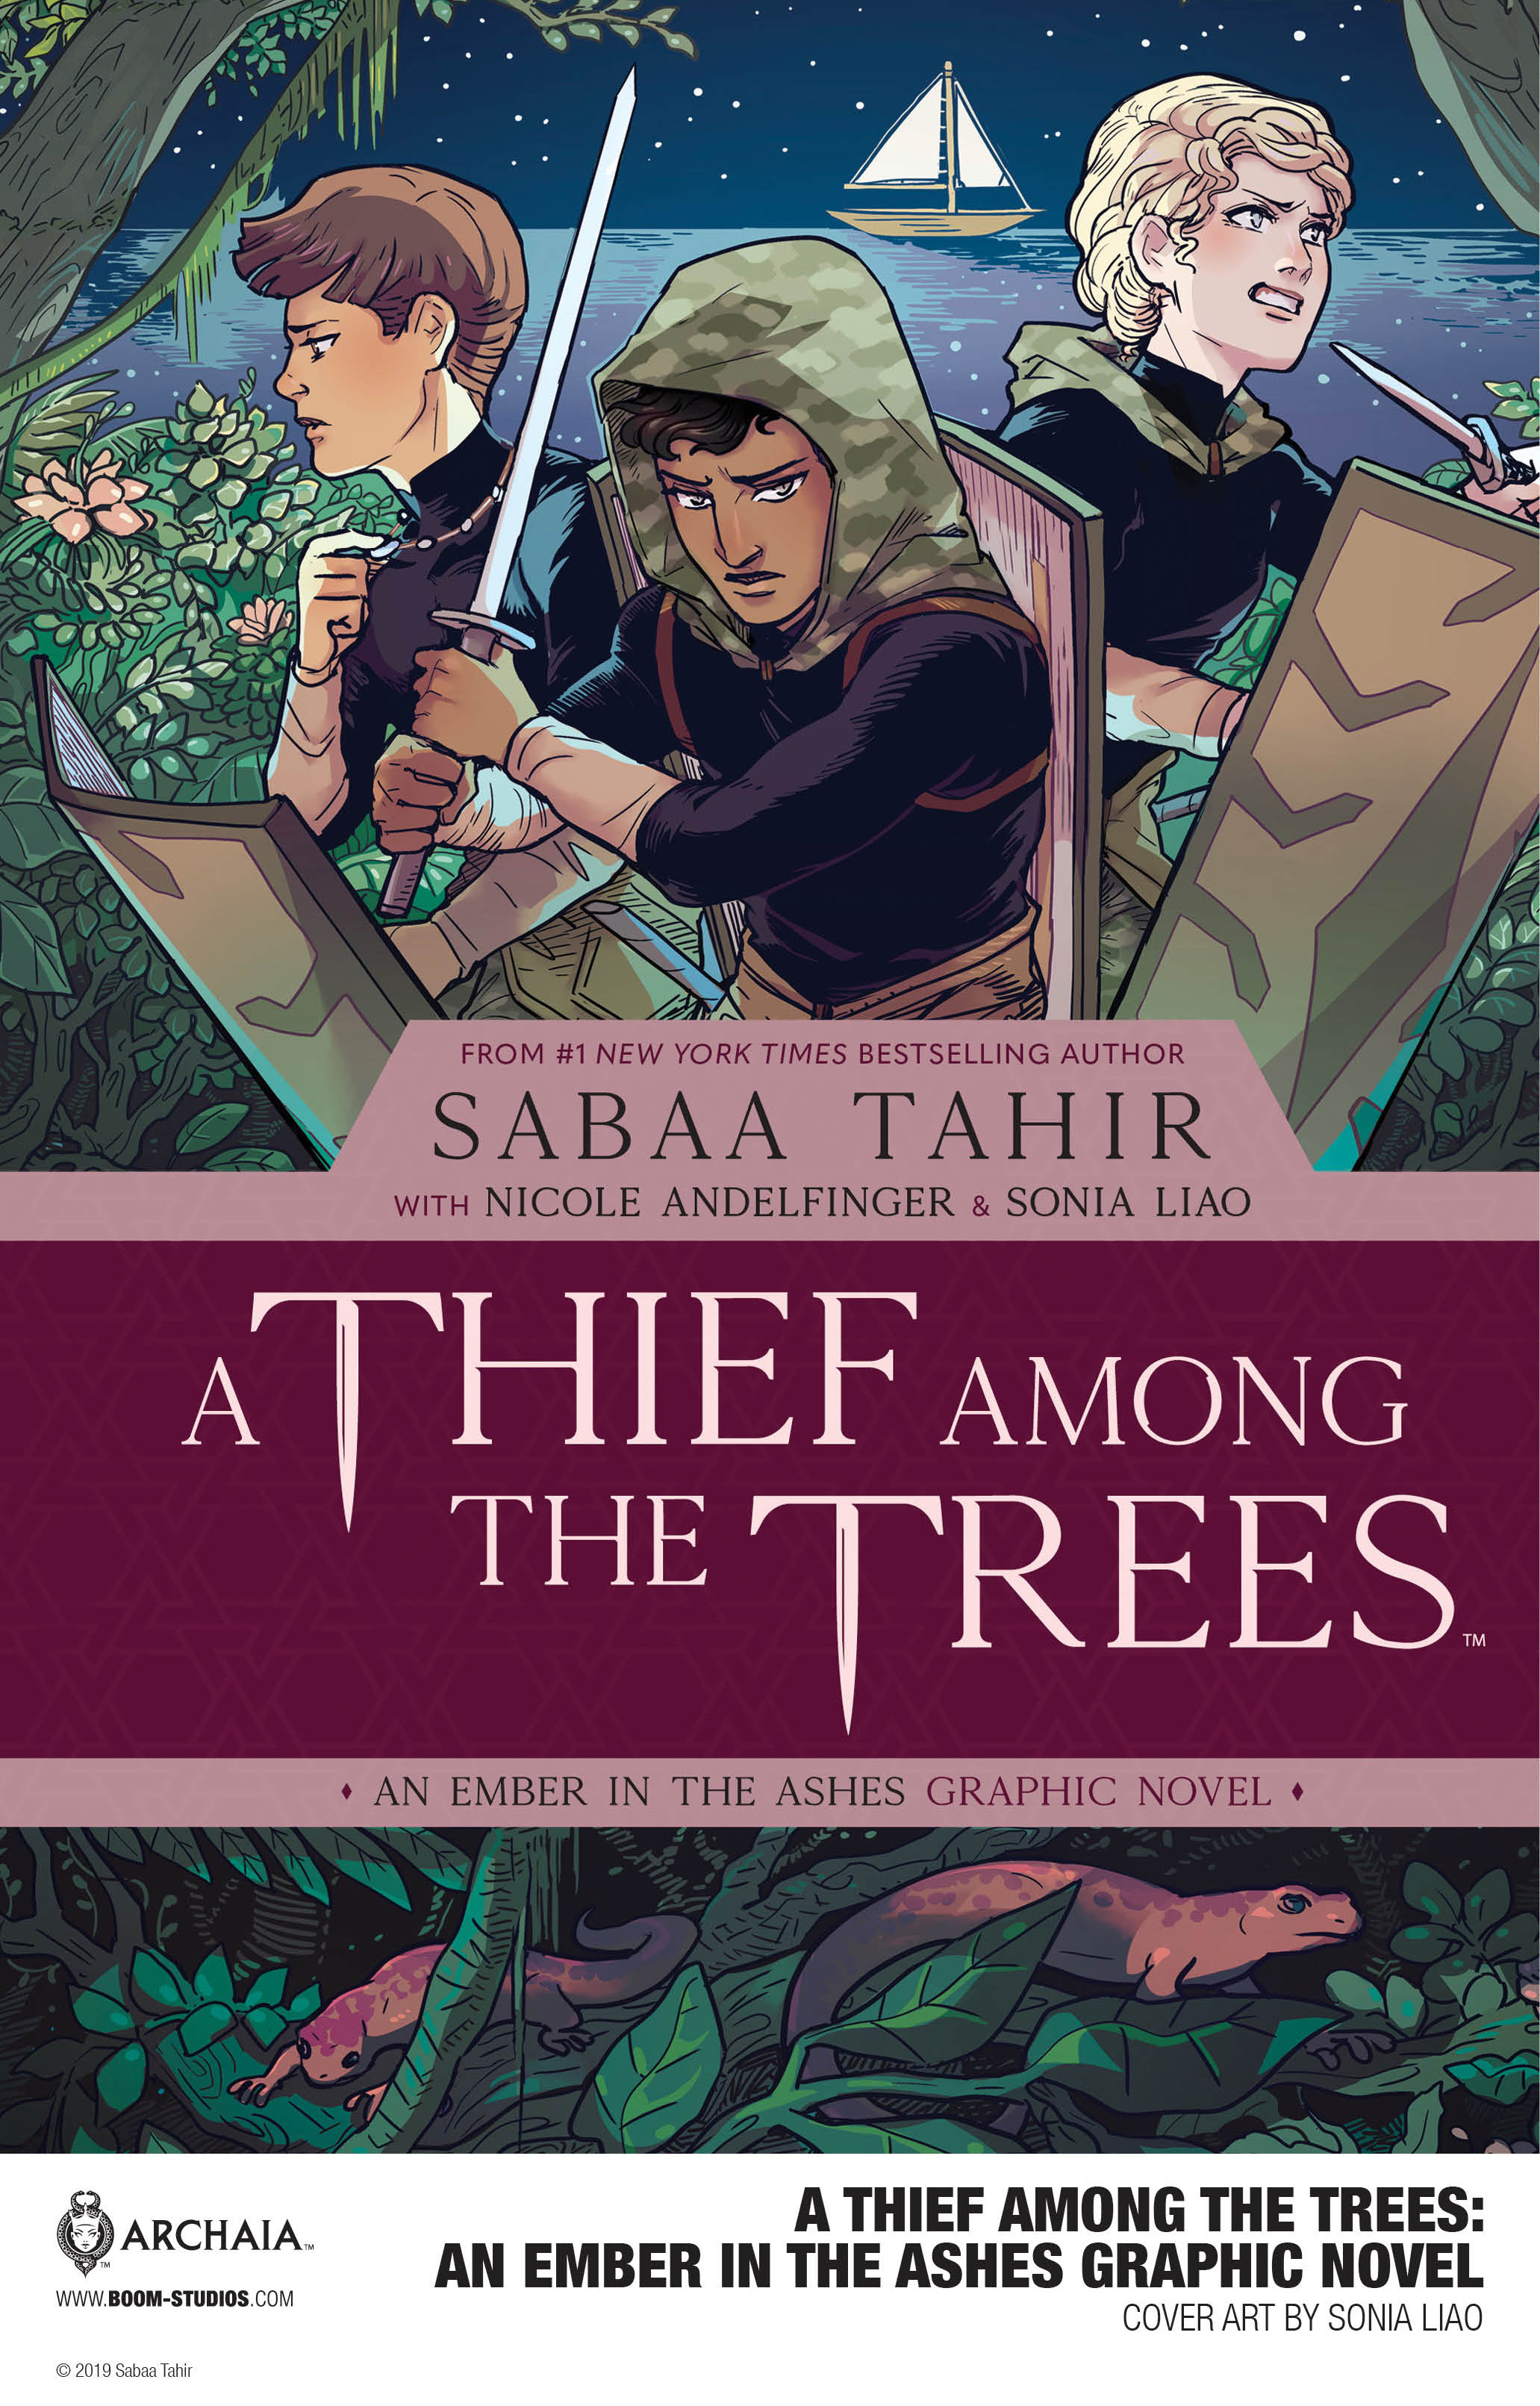 A Thief Among the Trees: An Ember In the Ashes OGN